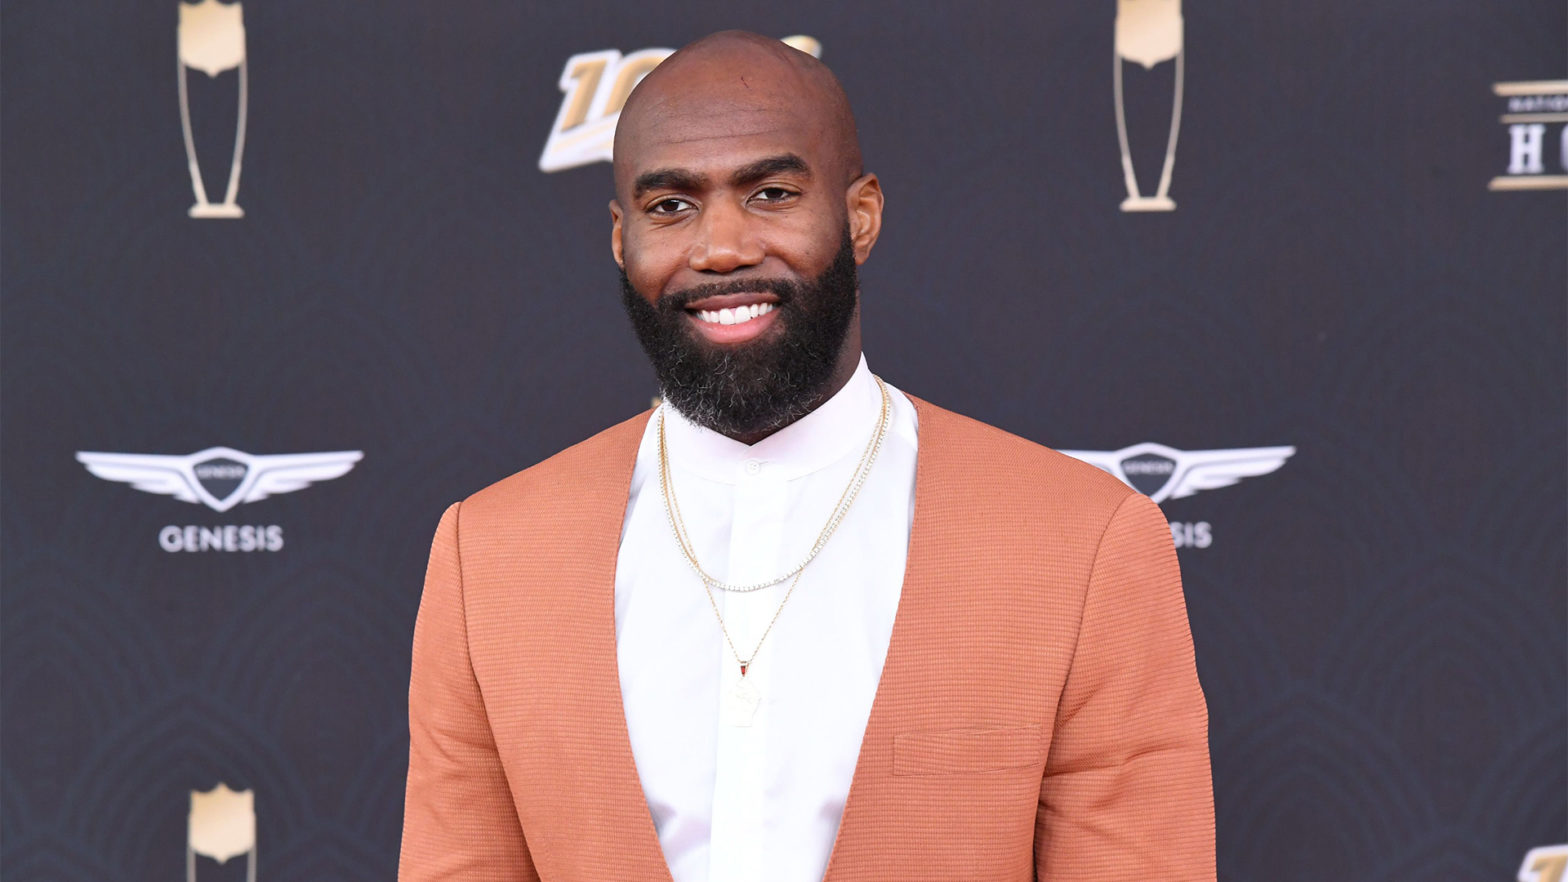 Former Philadelphia Eagles Star Malcolm Jenkins Pays Tribute With 'DREAM CHASER' NFT In His Debut Collection